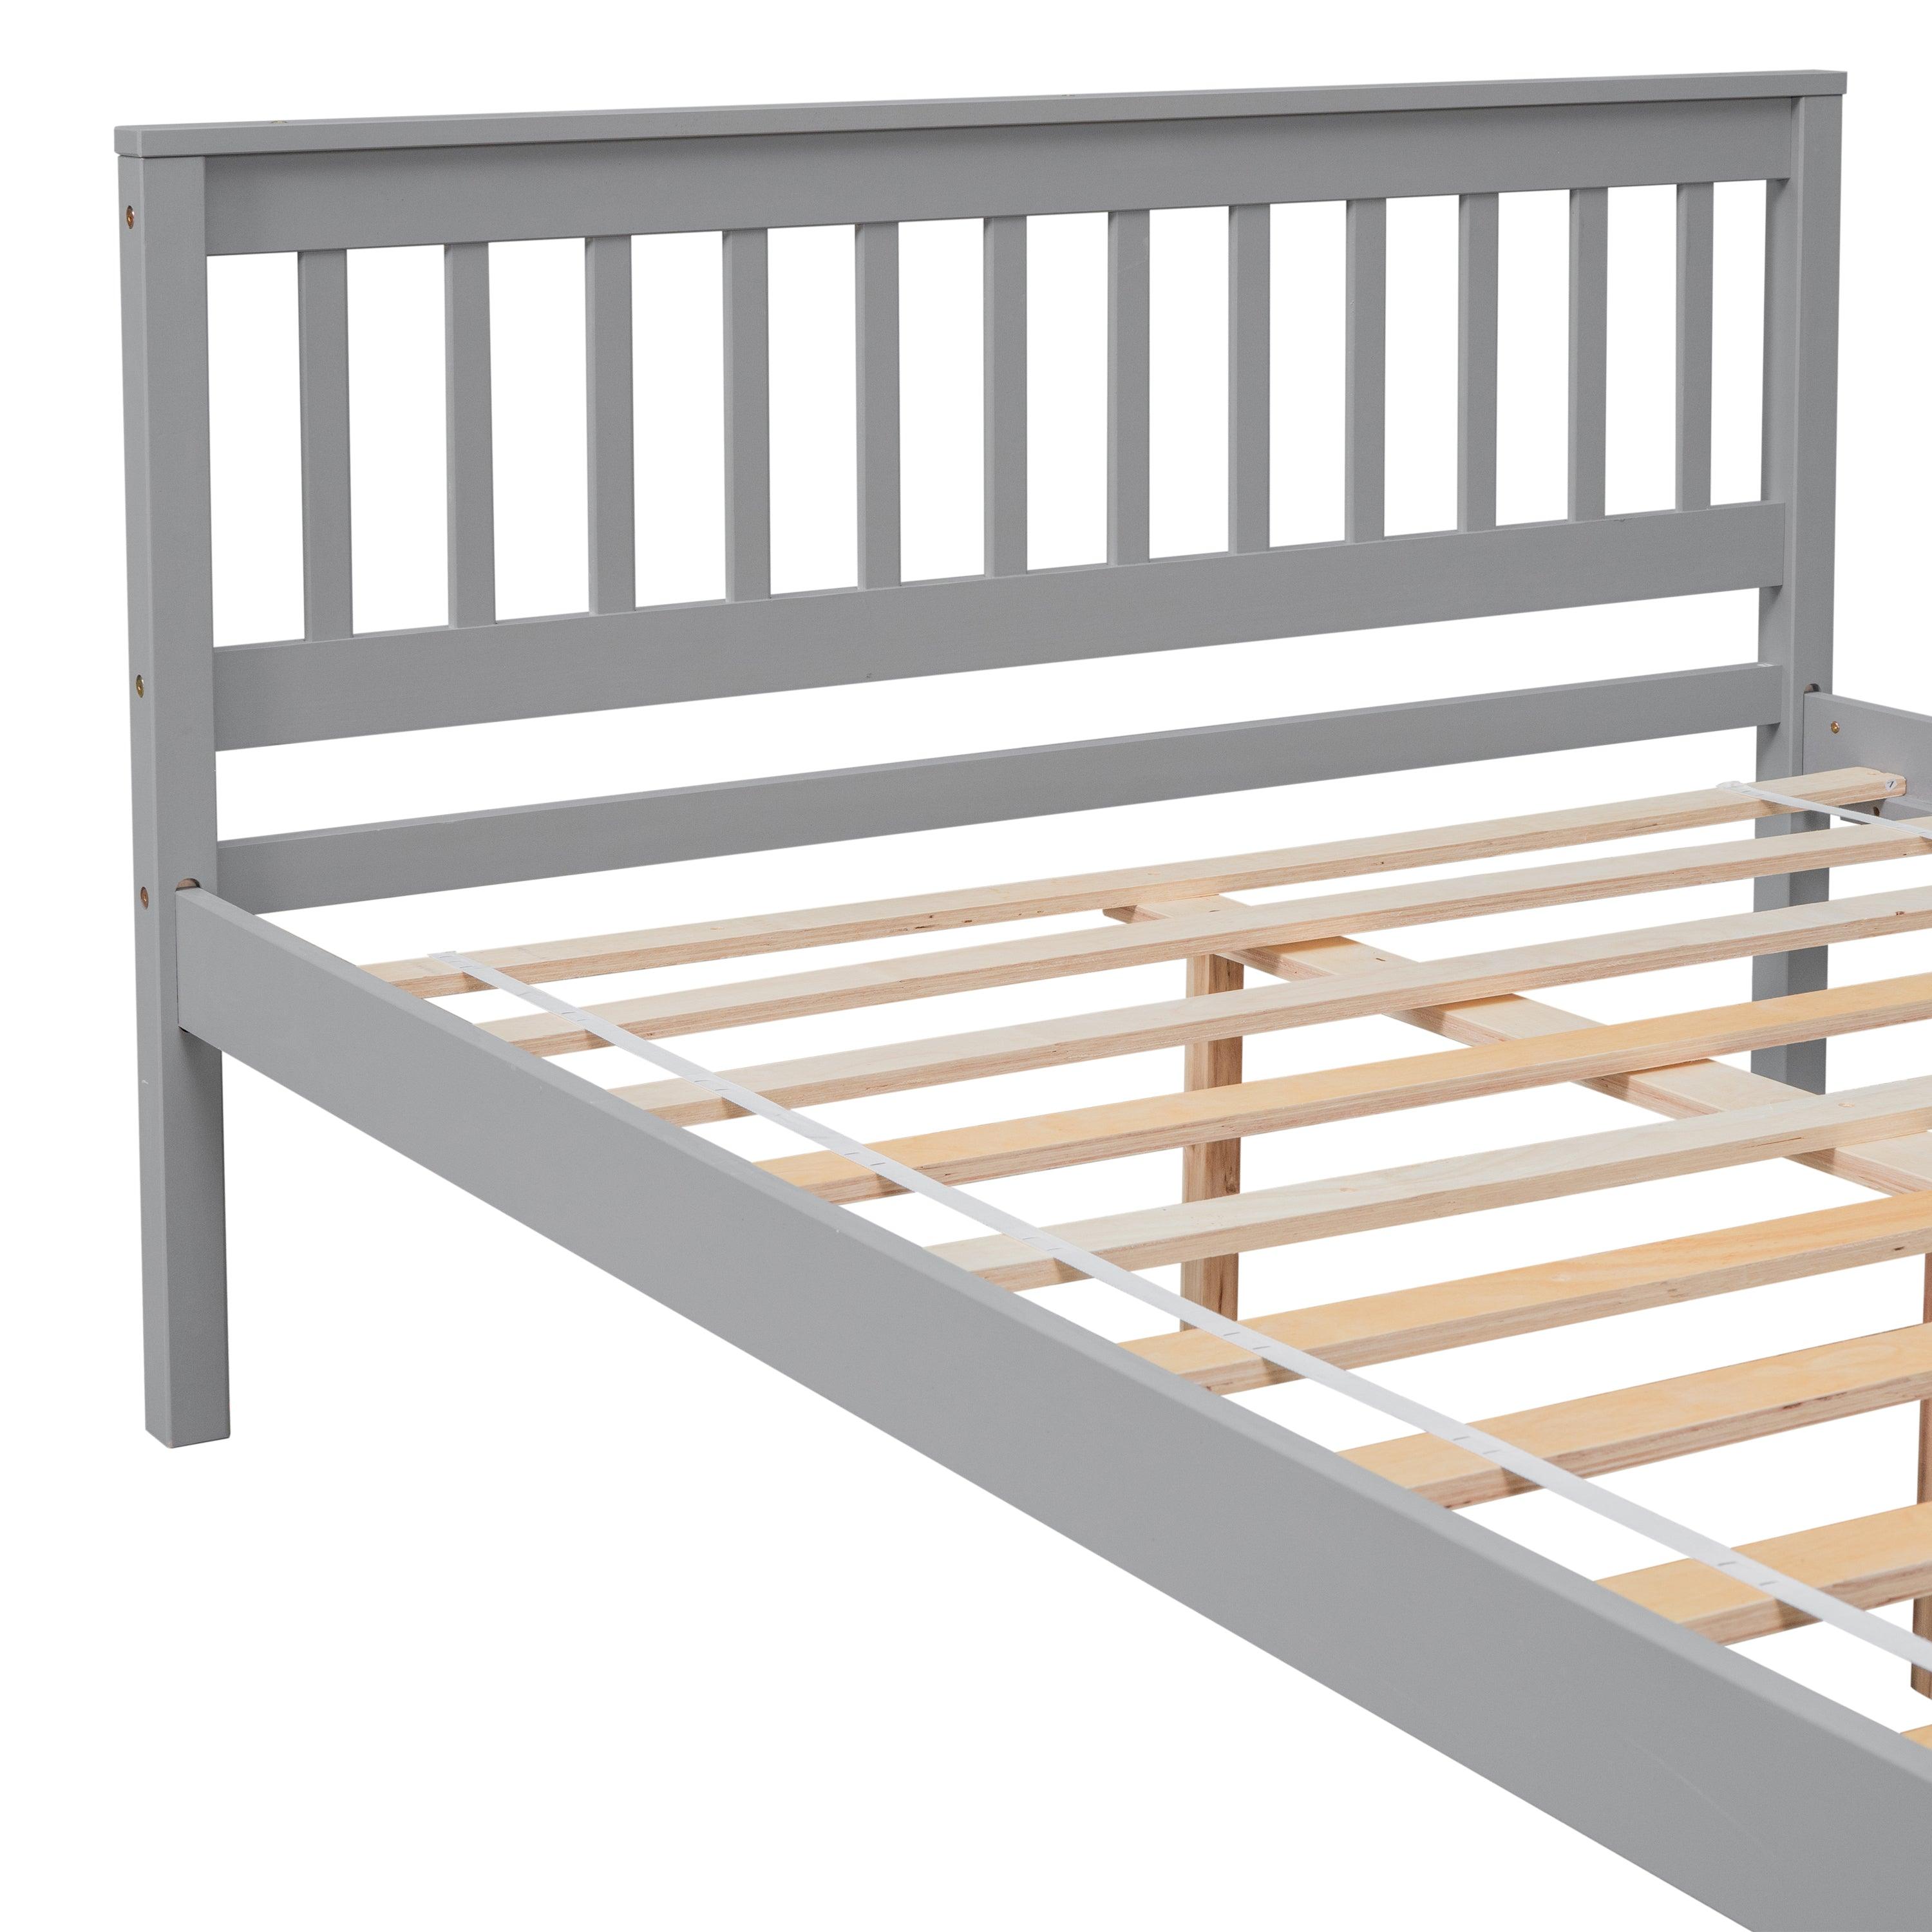 Full Bed With Headboard, Footboard And Nightstand For Kids, Teens, & Adults, Grey